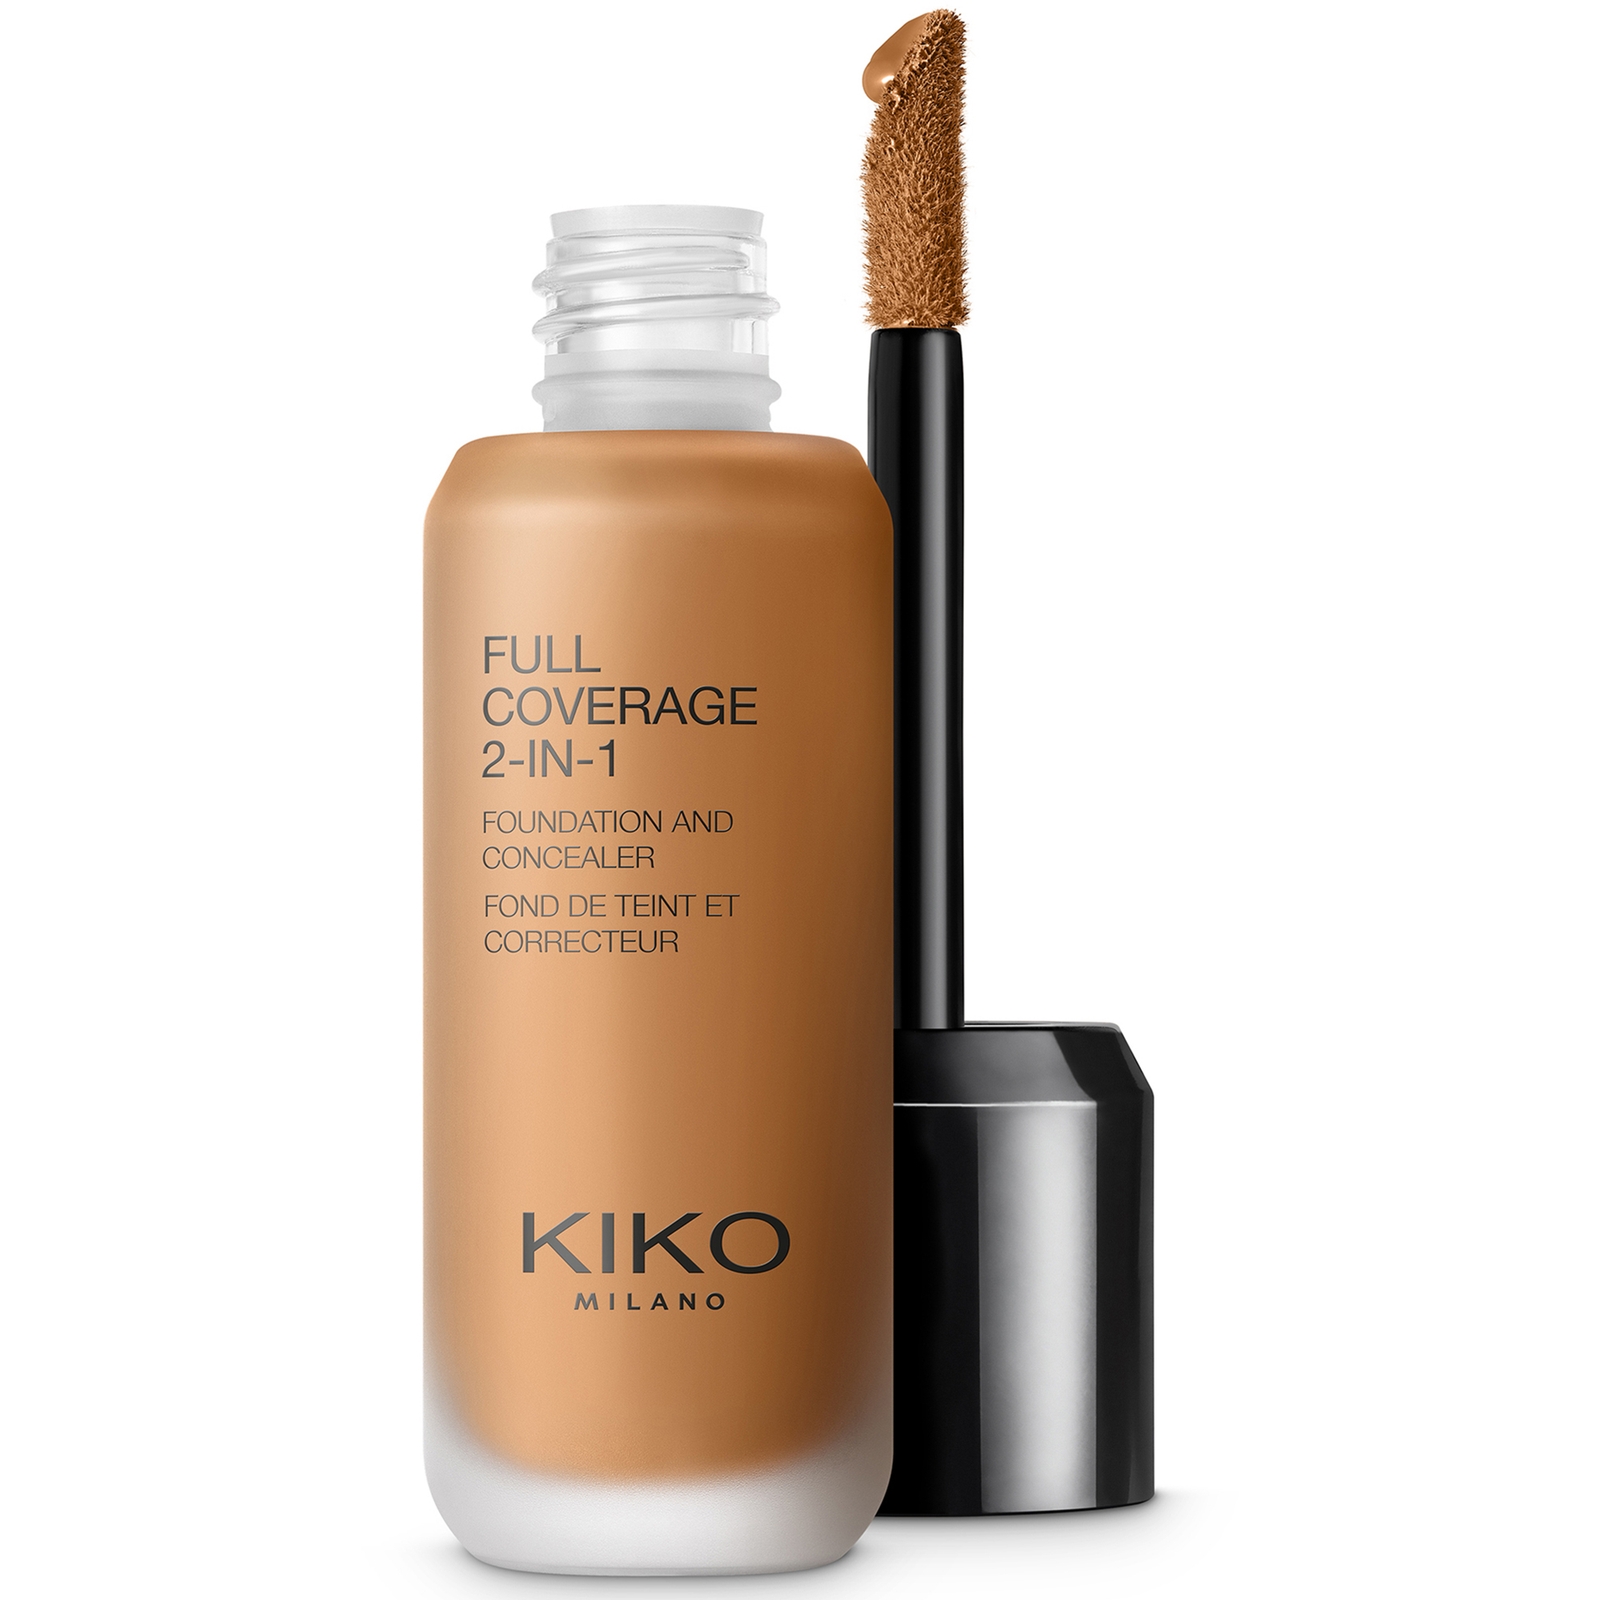 KIKO Milano Full Coverage 2-in-1 Foundation and Concealer 25ml (Various Shades) - 105 Olive